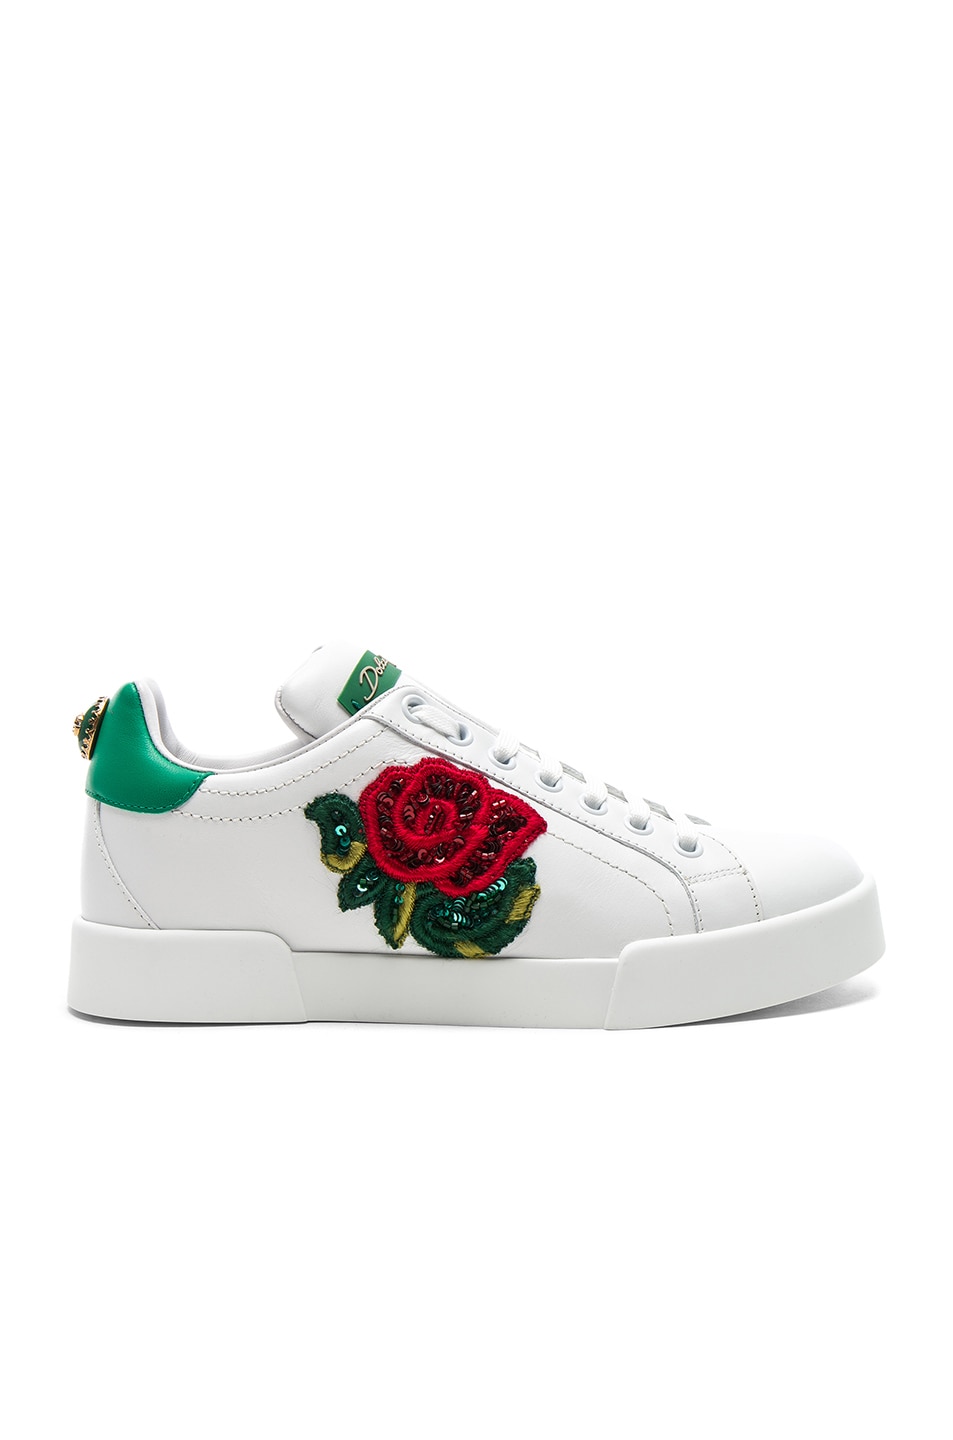 Image 1 of Dolce & Gabbana Sequin Rose Leather Sneaker in White & Multi